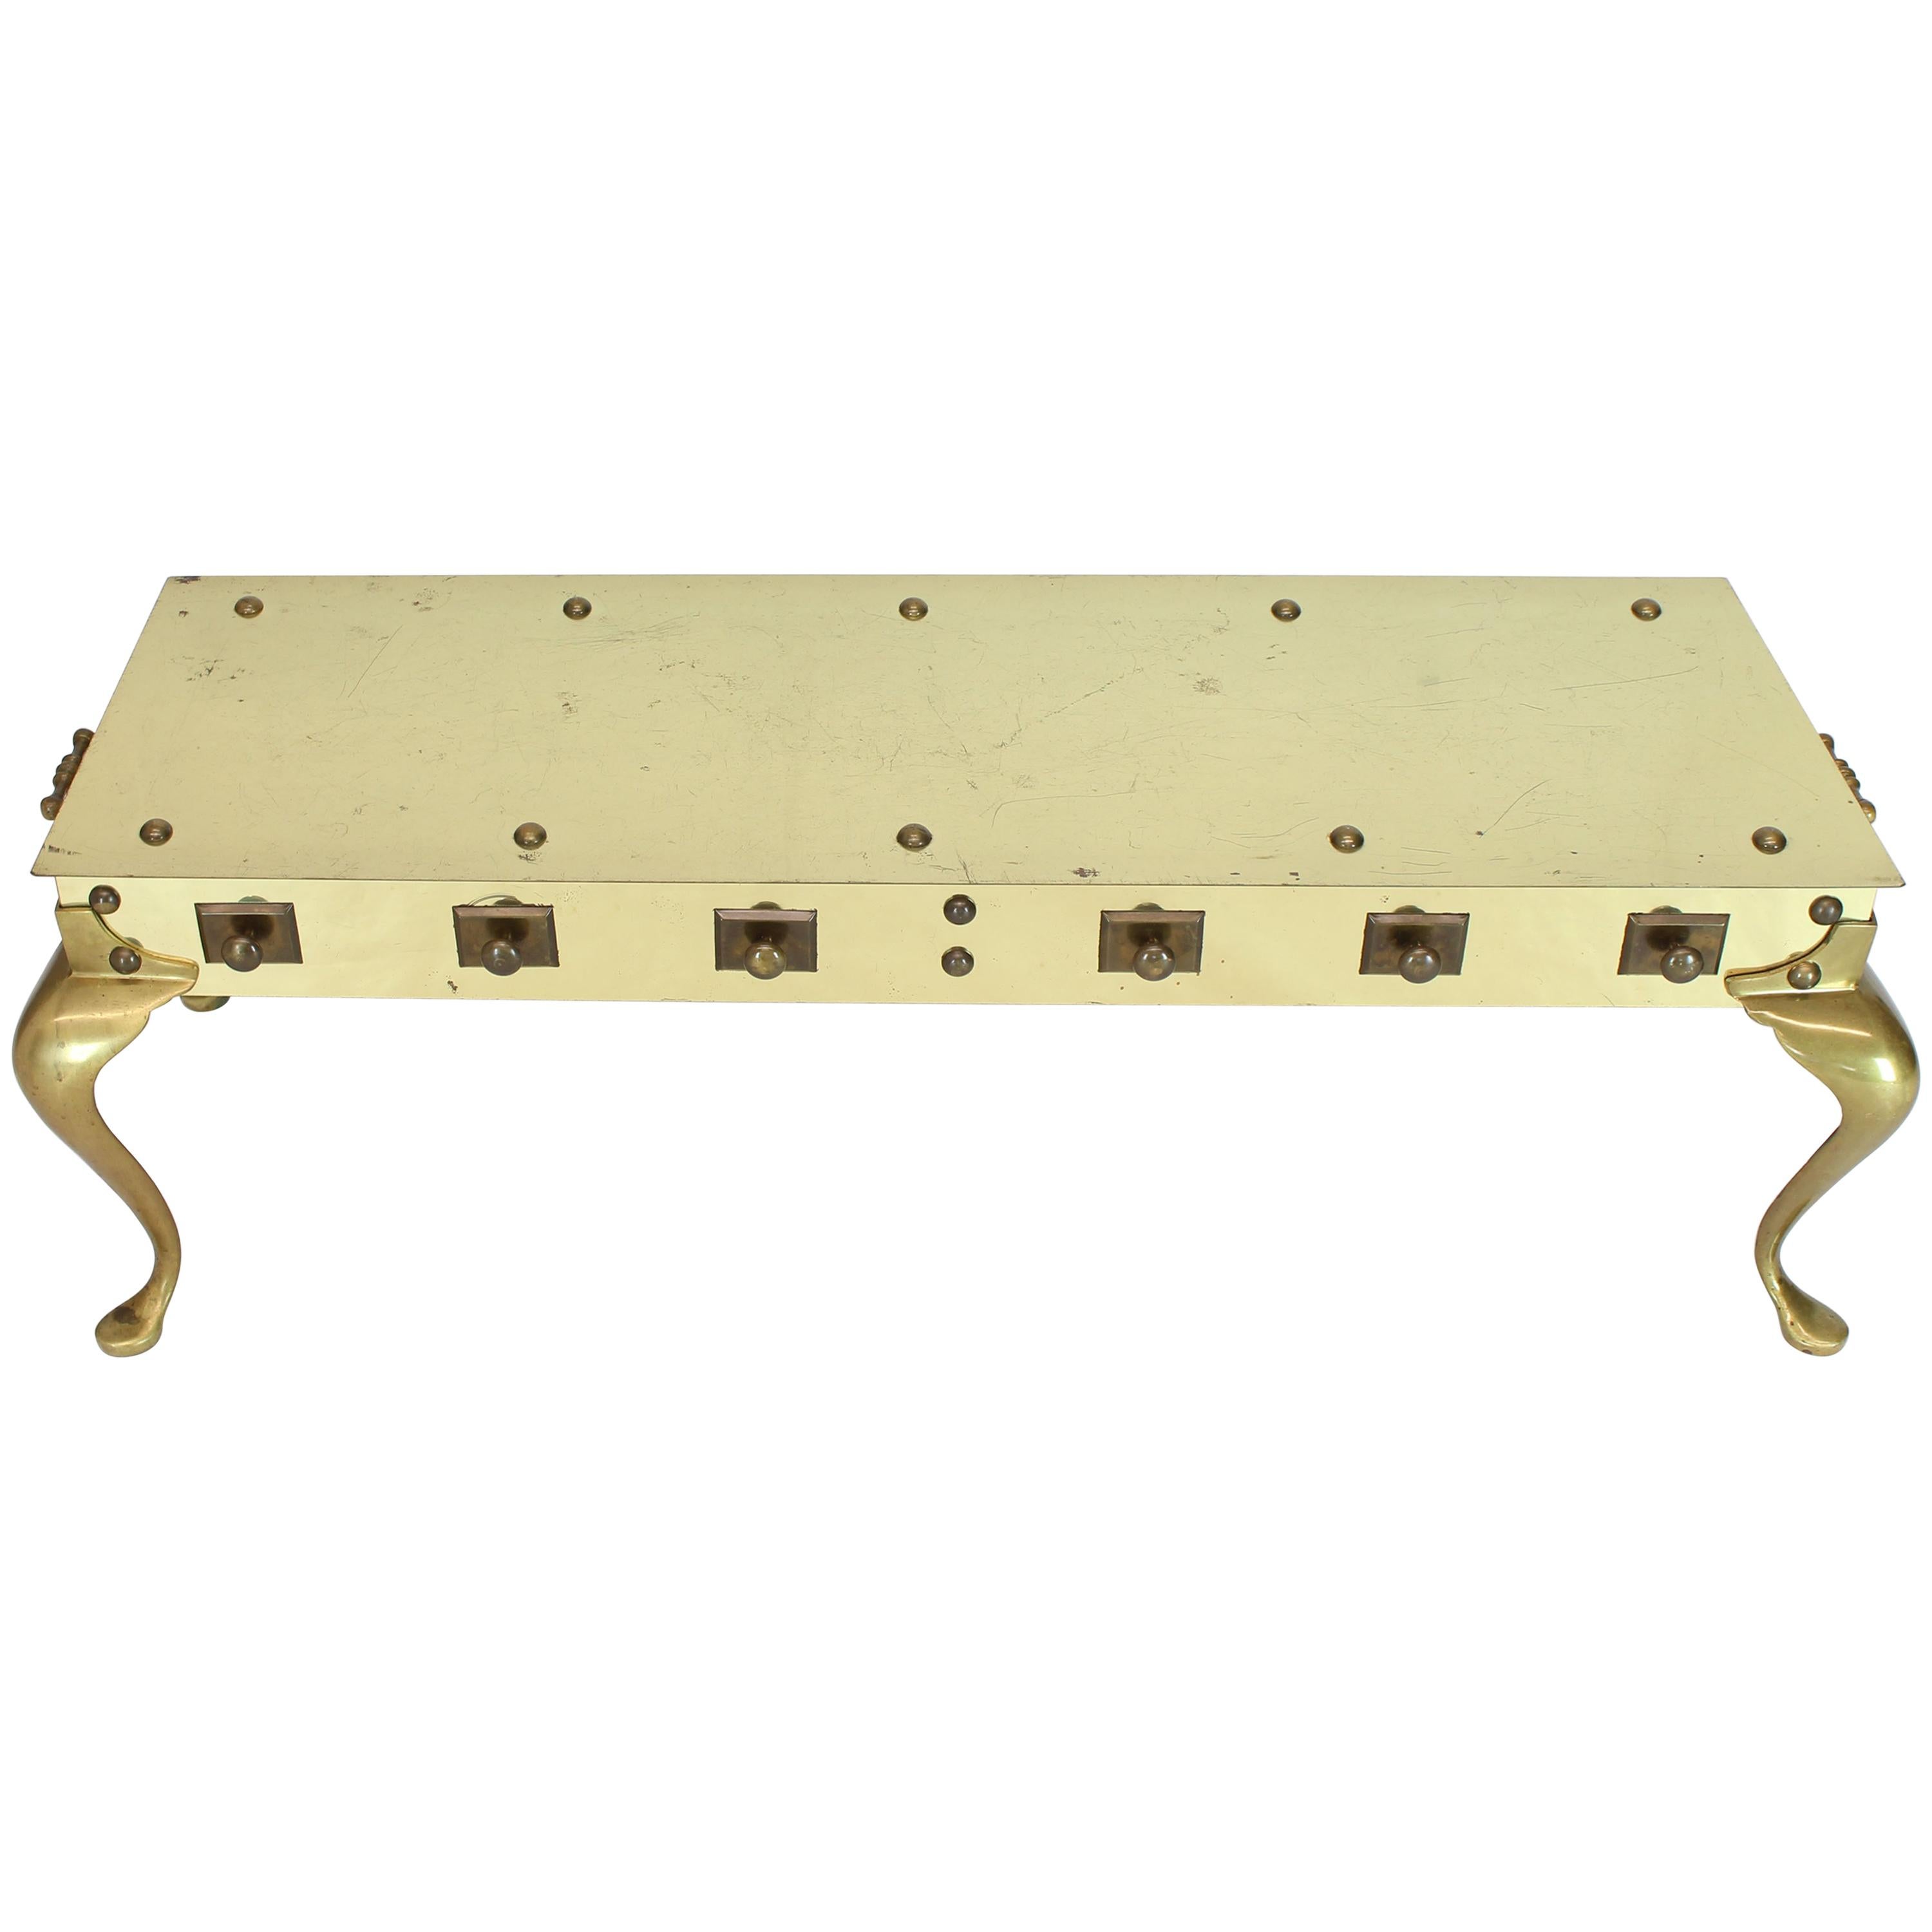 All Solid Brass Studded Rectangular Table with Carry Handles For Sale